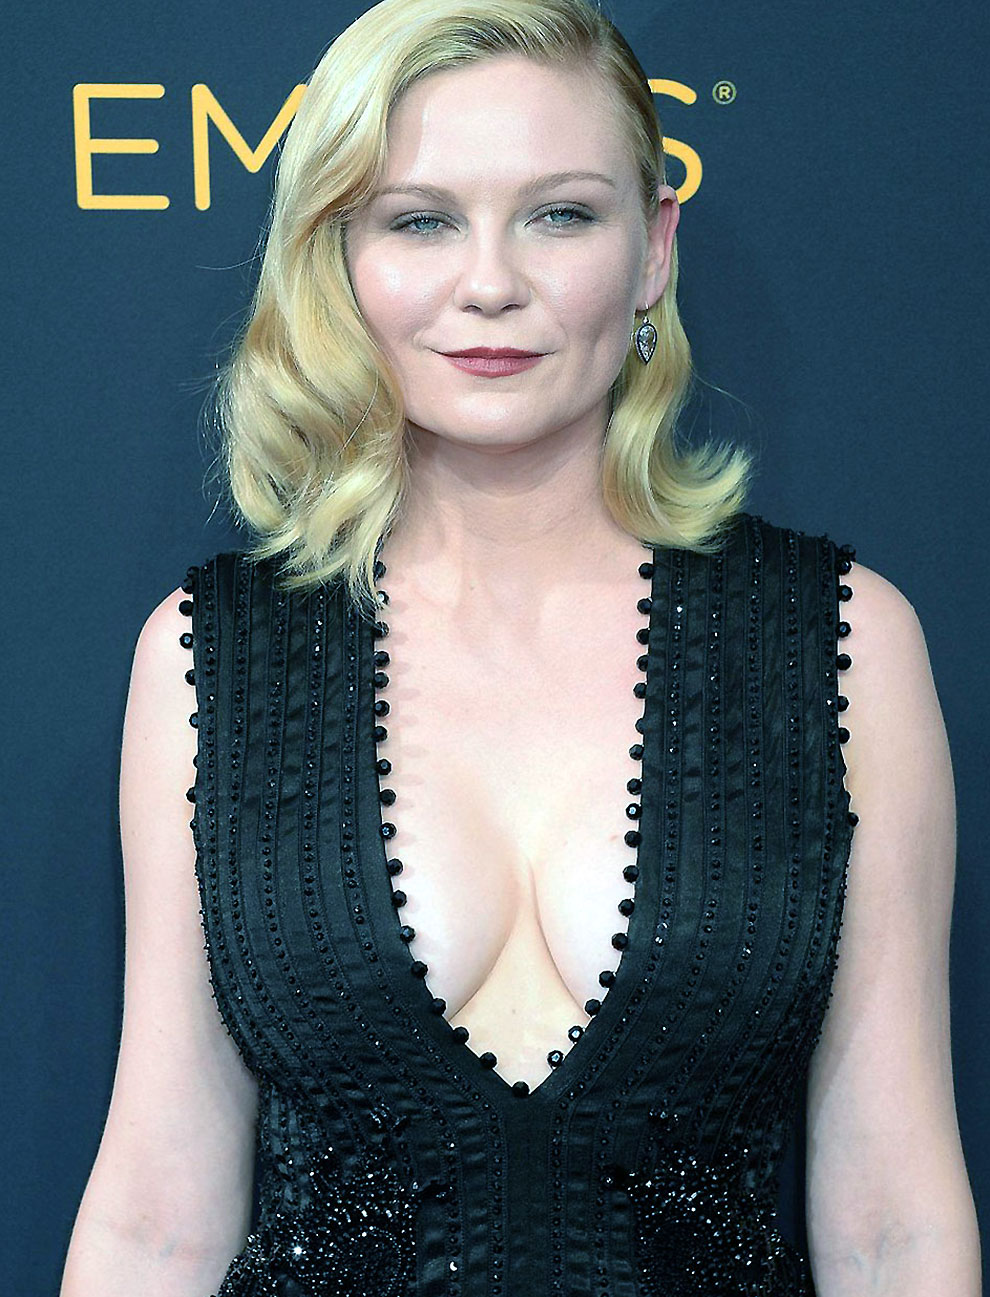 Kirsten Dunst nude naked sexy topless cleavage nipples pussy26 optimized